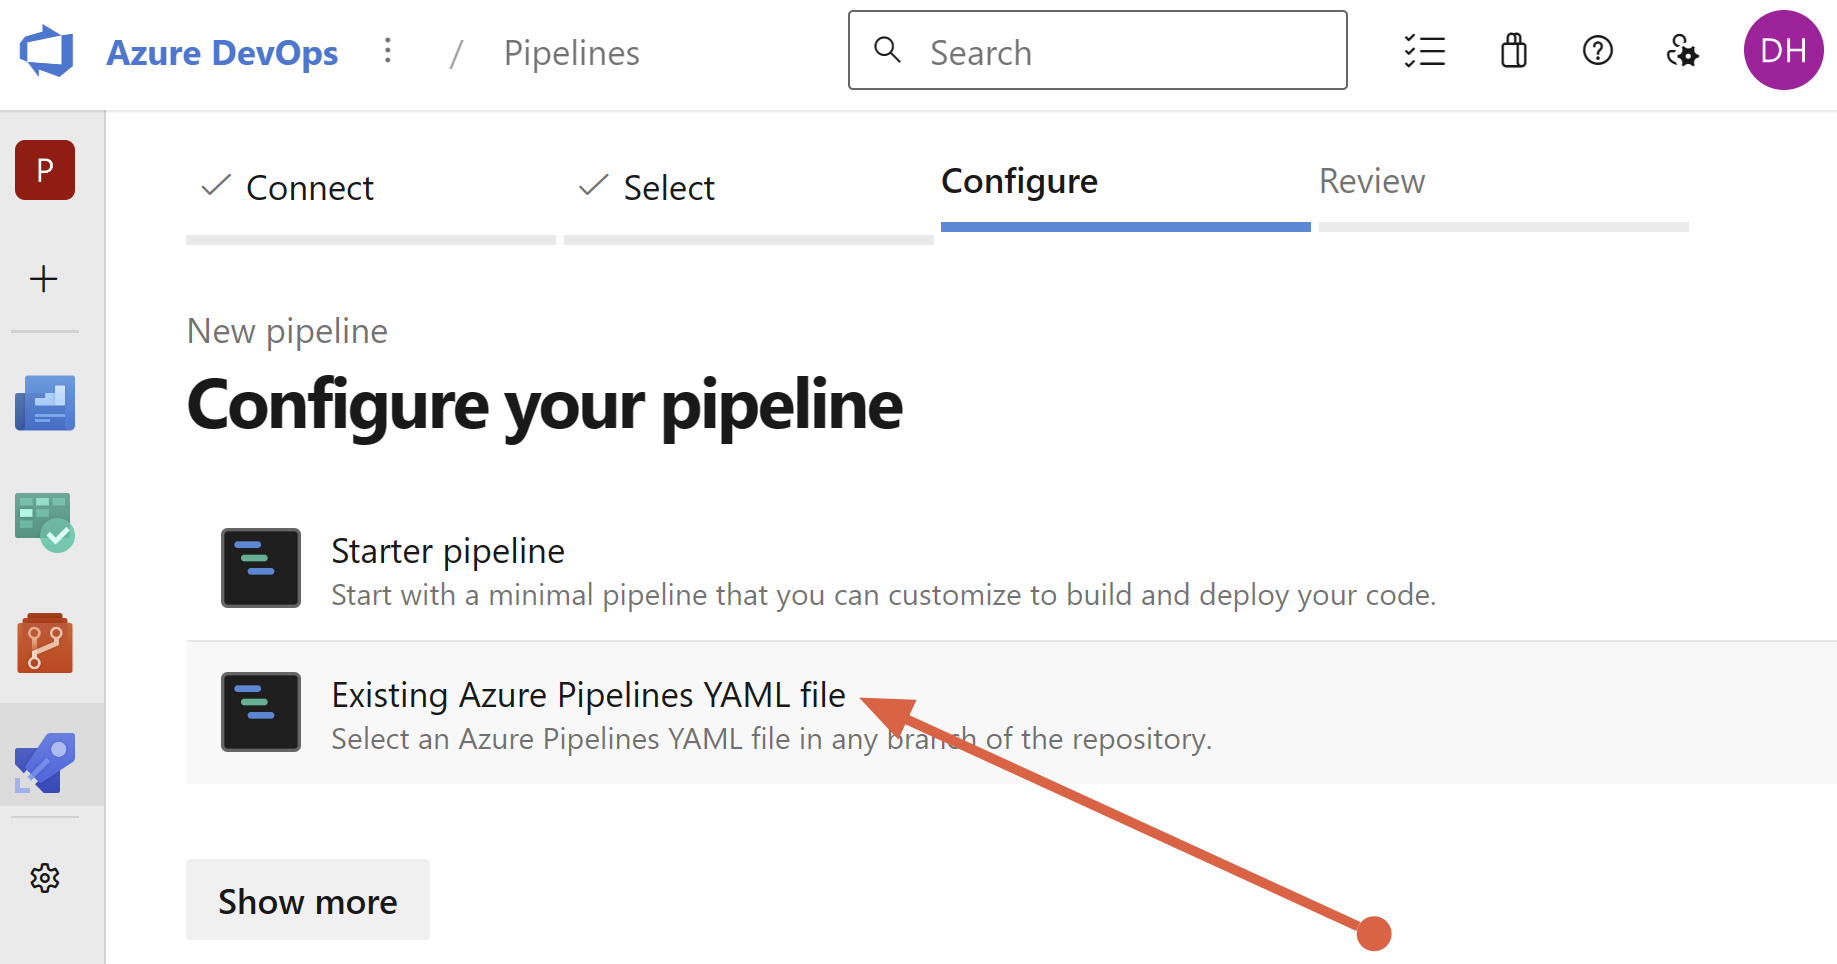 Choose to use an existing Azure Pipeline YAML file.